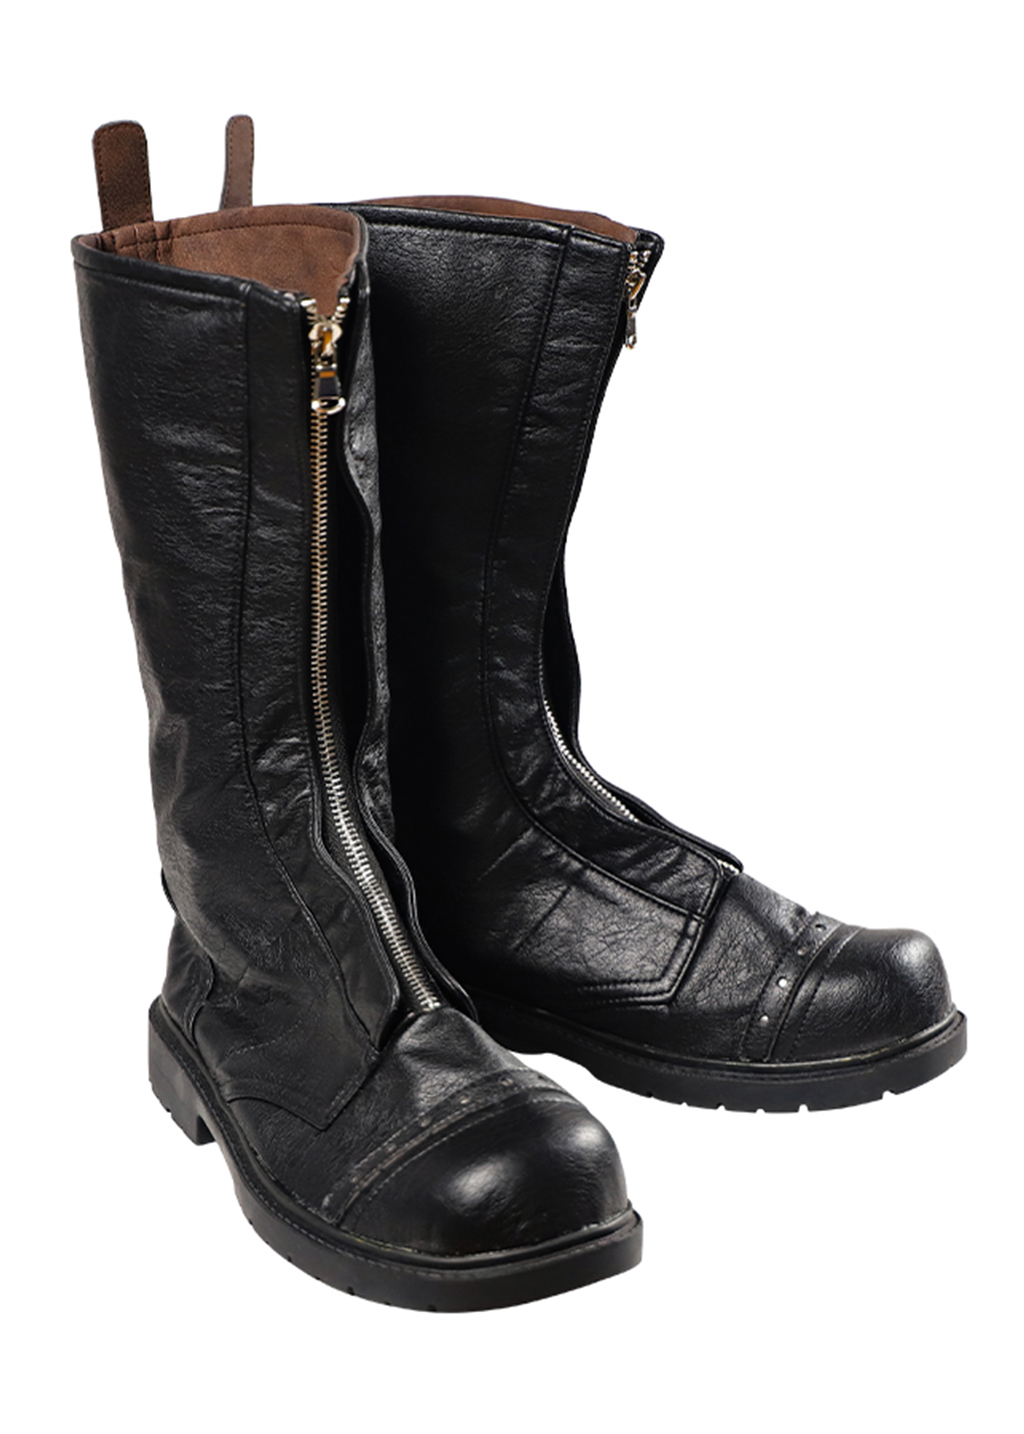 Final Fantasy VII Shoes Zack Fair Boots Cosplay